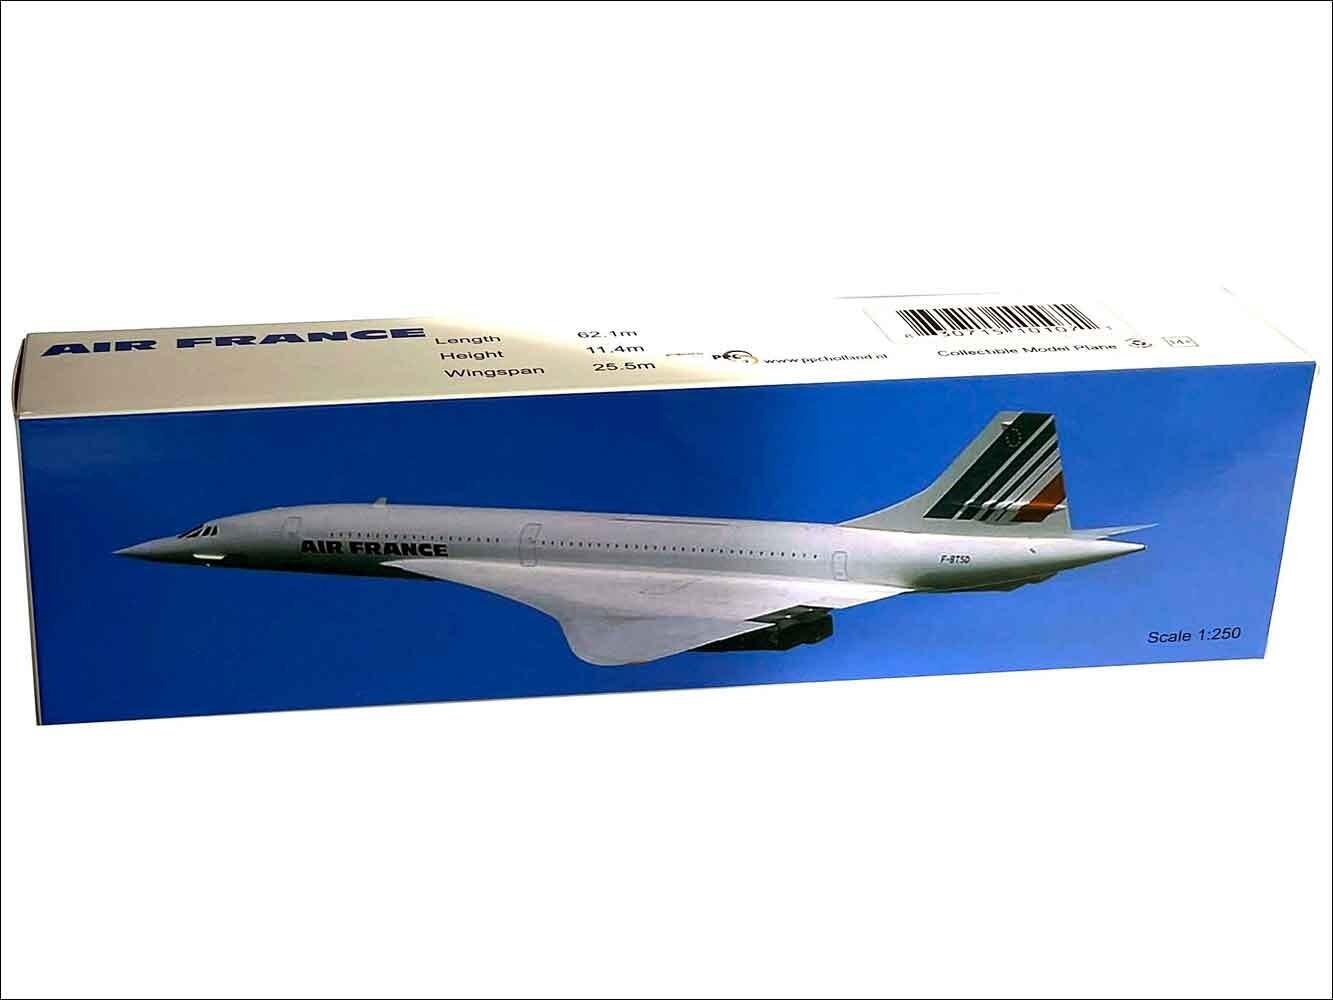 Air France Concorde Airplane Model 1:250